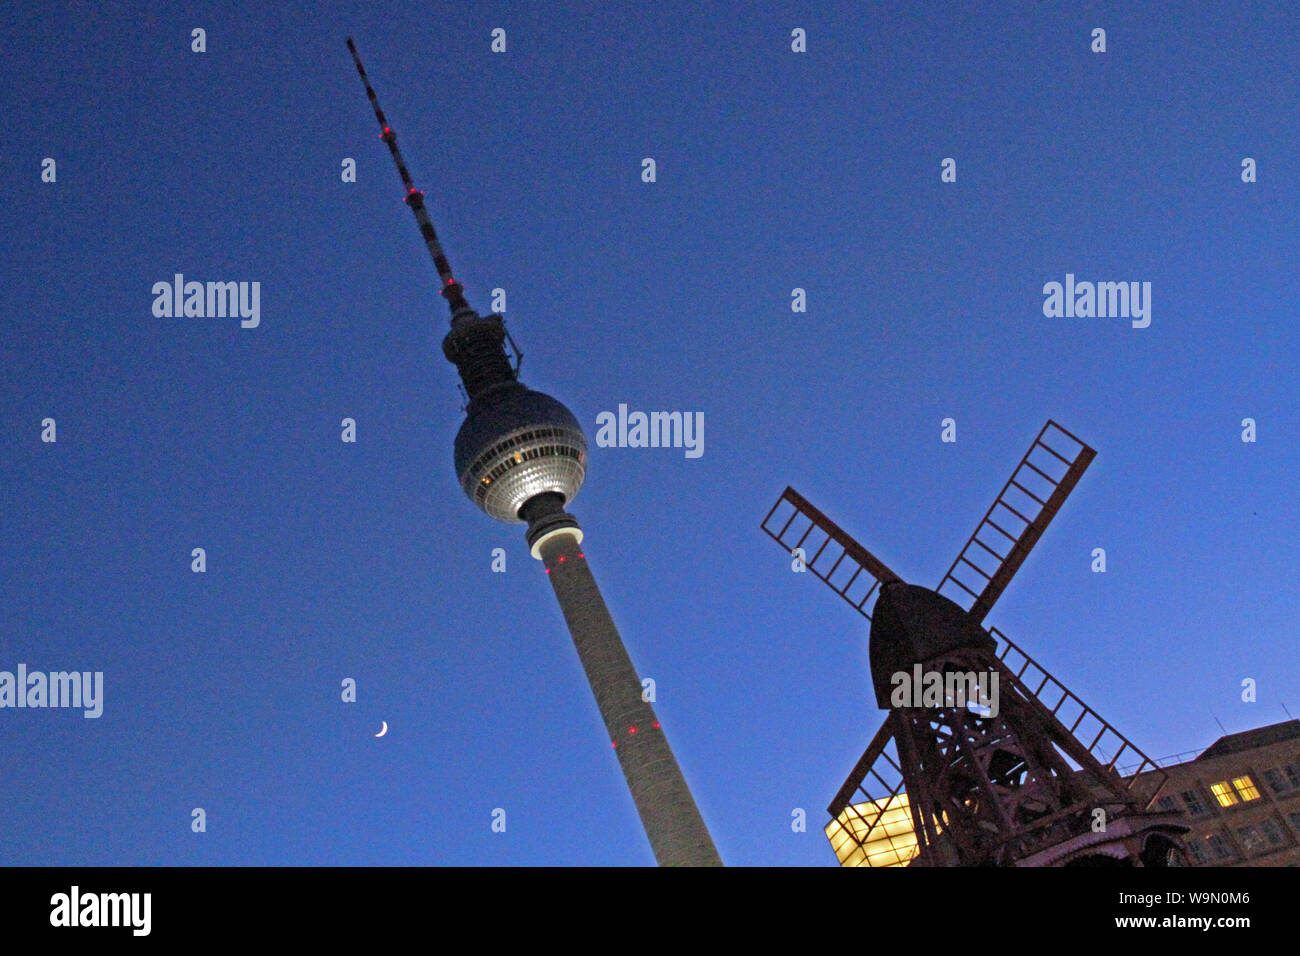 The Berlin Television Tower is a broadcasting tower located in the center of Berlin, capital of Germany. It is a well-known landmark. Stock Photo